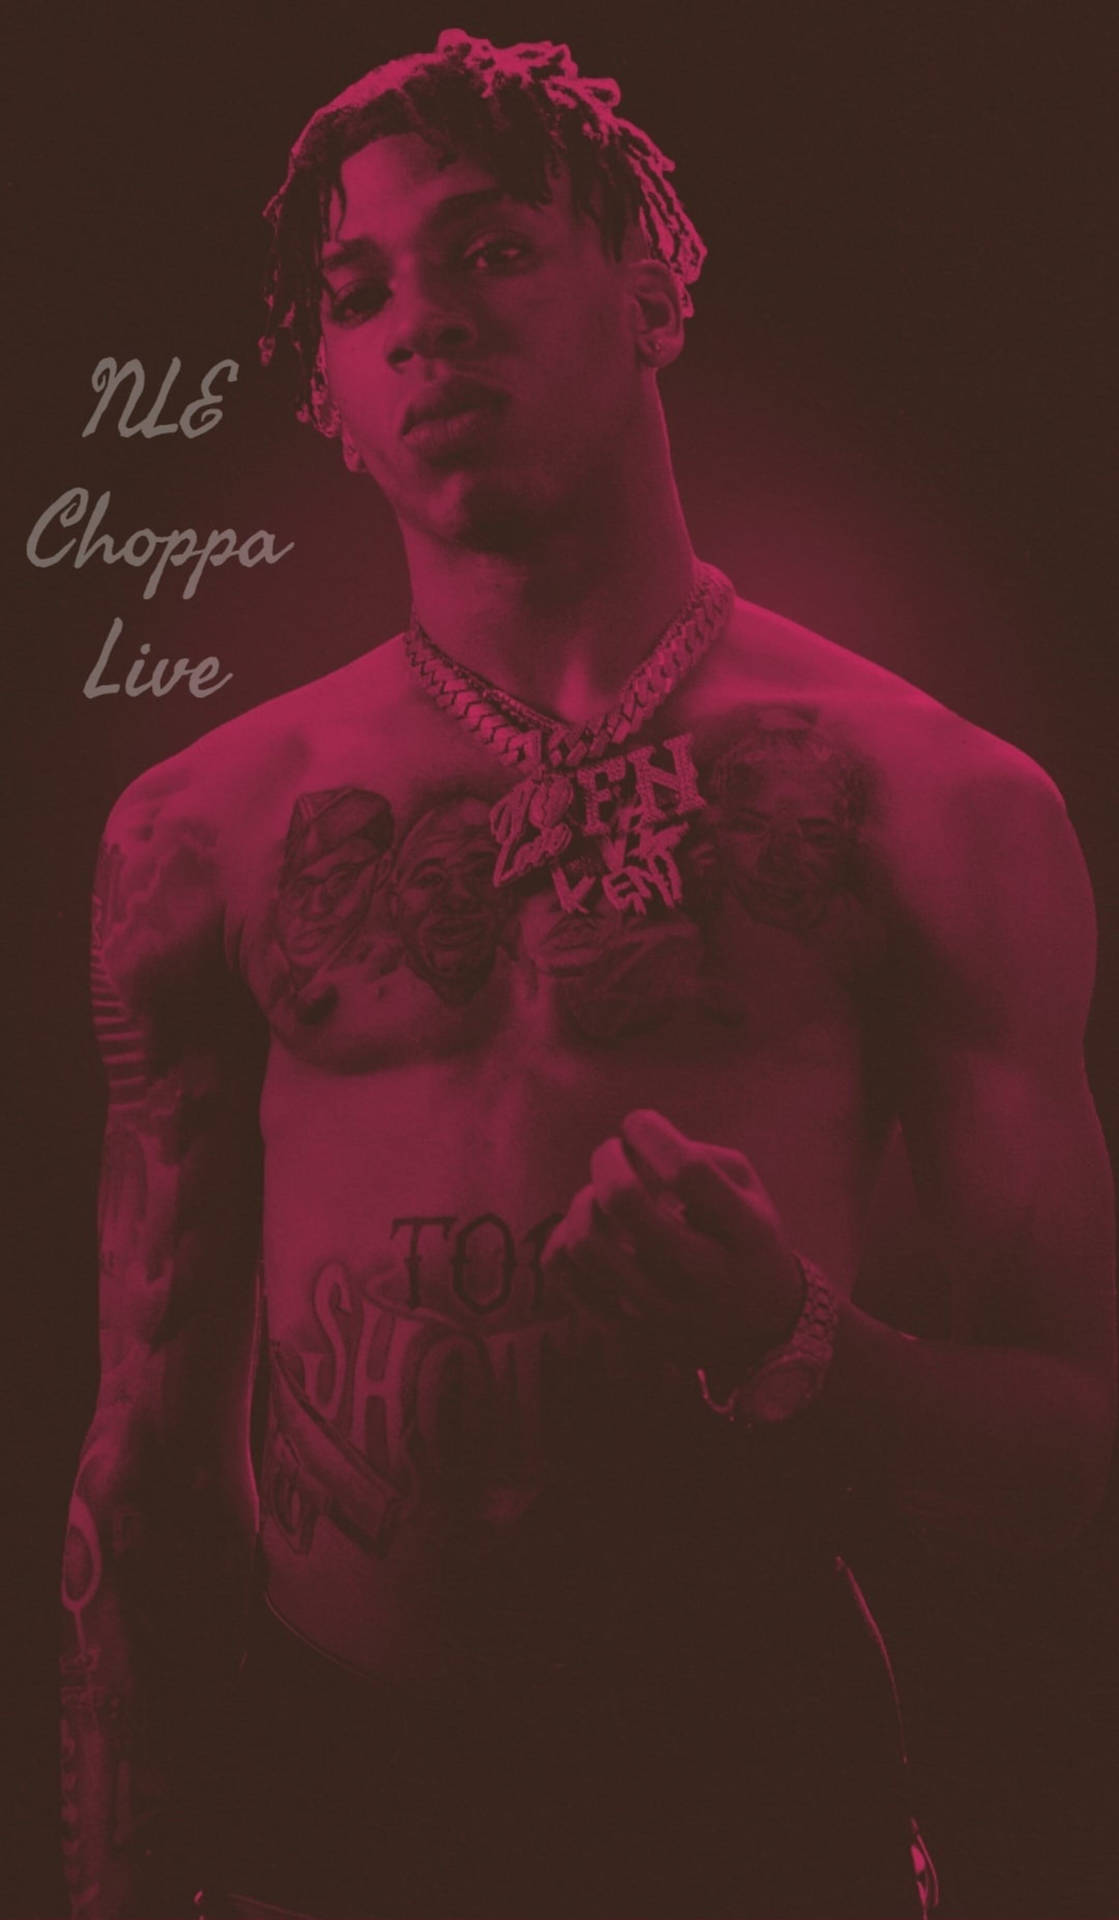 Nle Choppa Performing Live Background